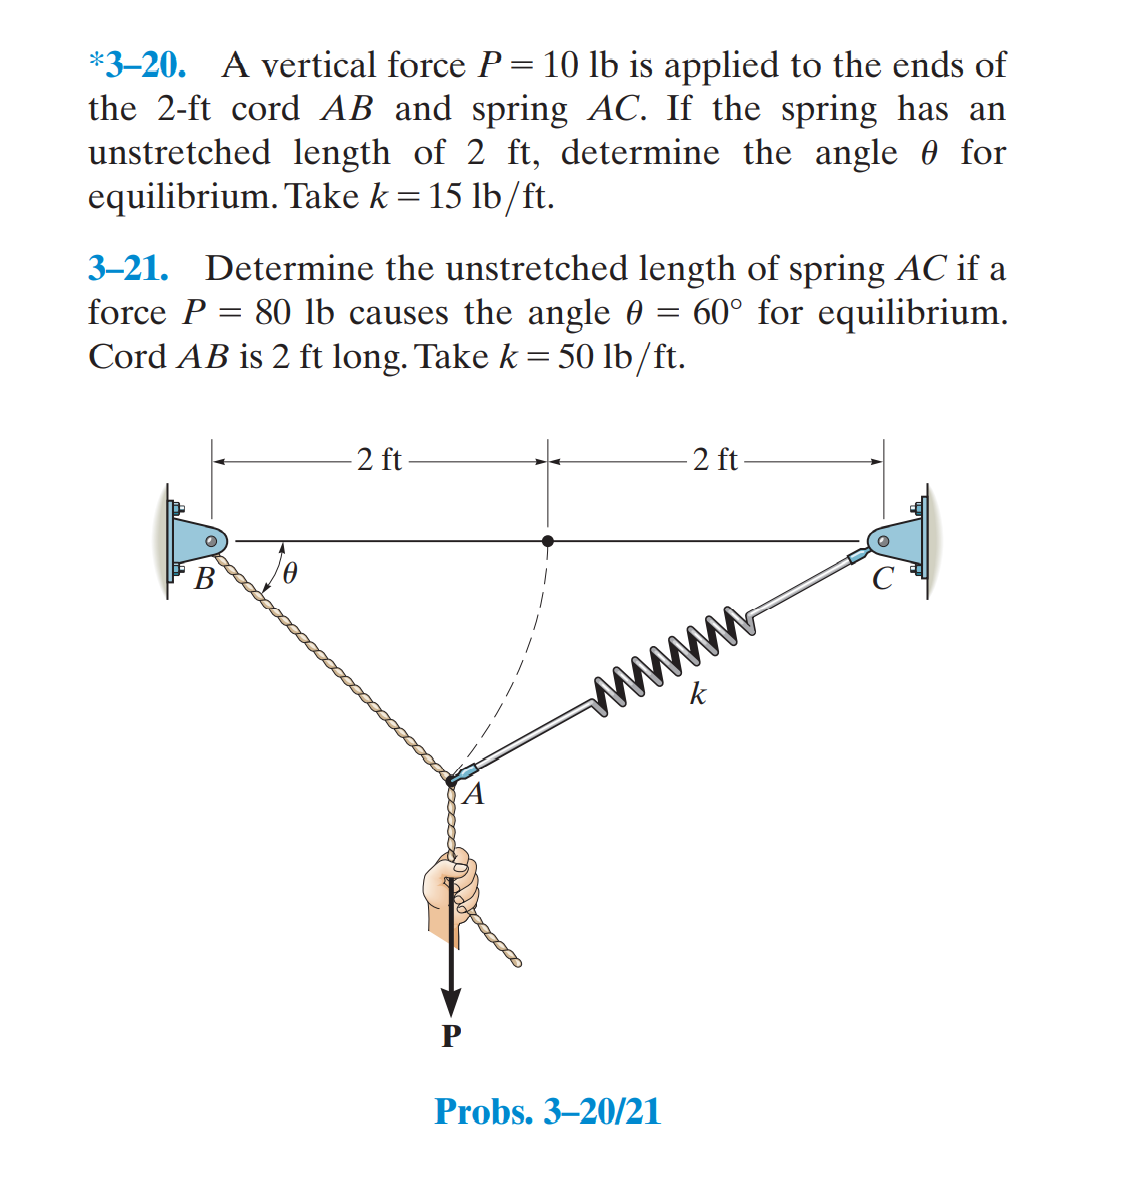 *3–20. A vertical force P= 10 lb is applied to the ends of
the 2-ft cord AB and spring AC. If the spring has an
unstretched length of 2 ft, determine the angle 0 for
equilibrium. Take k = 15 lb/ft.
3–21. Determine the unstretched length of spring AC if a
force P = 80 lb causes the angle 0 = 60° for equilibrium.
Cord AB is 2 ft long. Take k = 50 lb/ft.
2 ft-
2 ft
В
ww
k
Probs. 3–20/21
